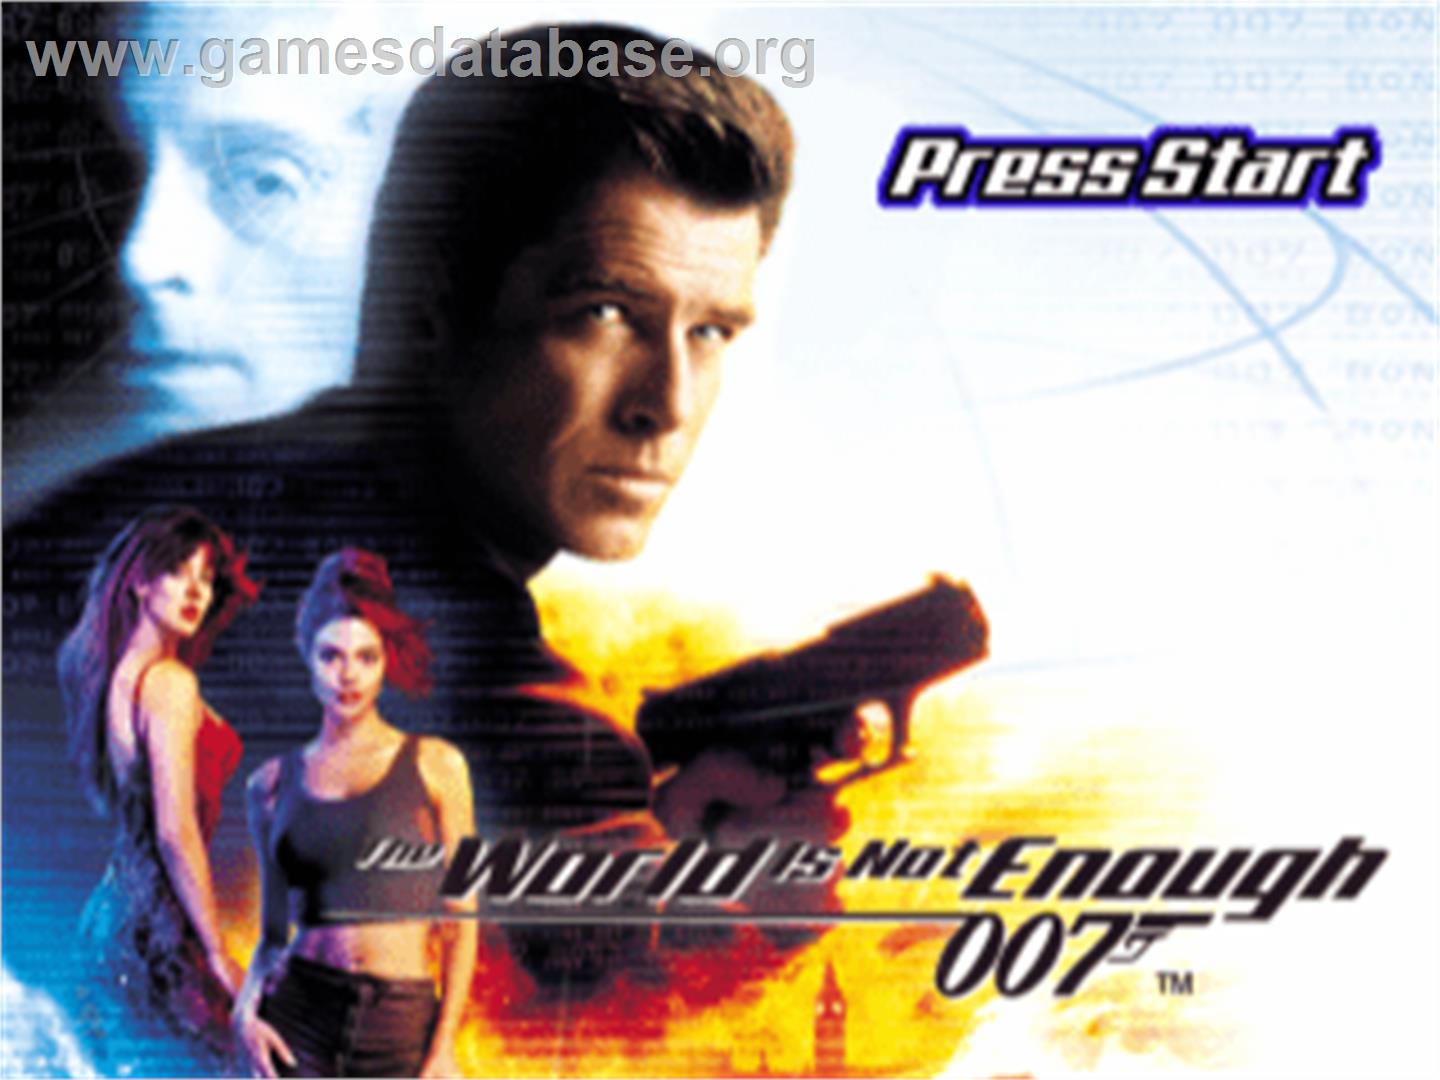 007: The World is Not Enough - Sony Playstation - Artwork - Title Screen